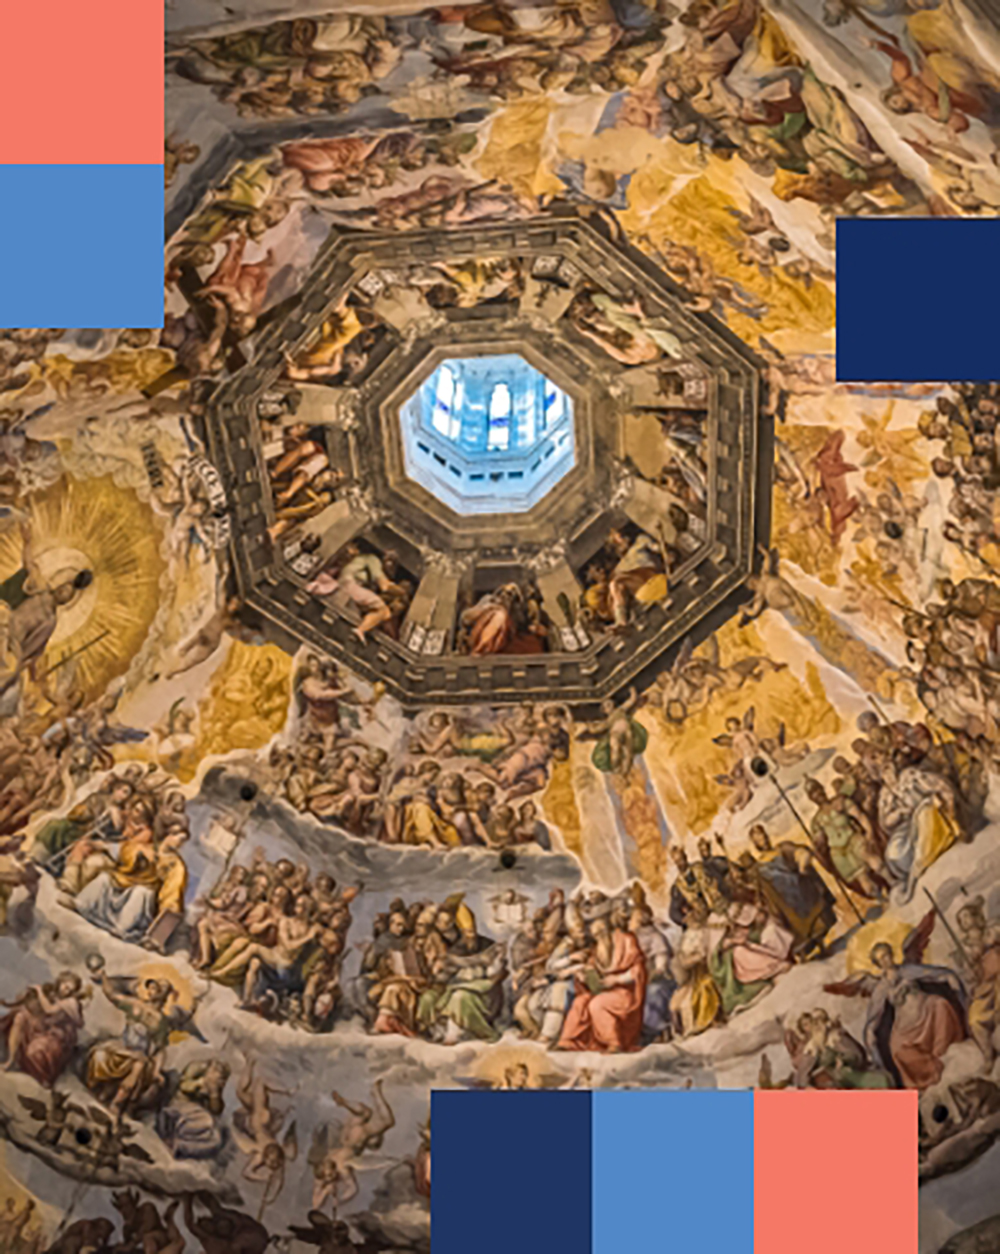 Frescoes on the dome of the Florence Cathedral - mobile